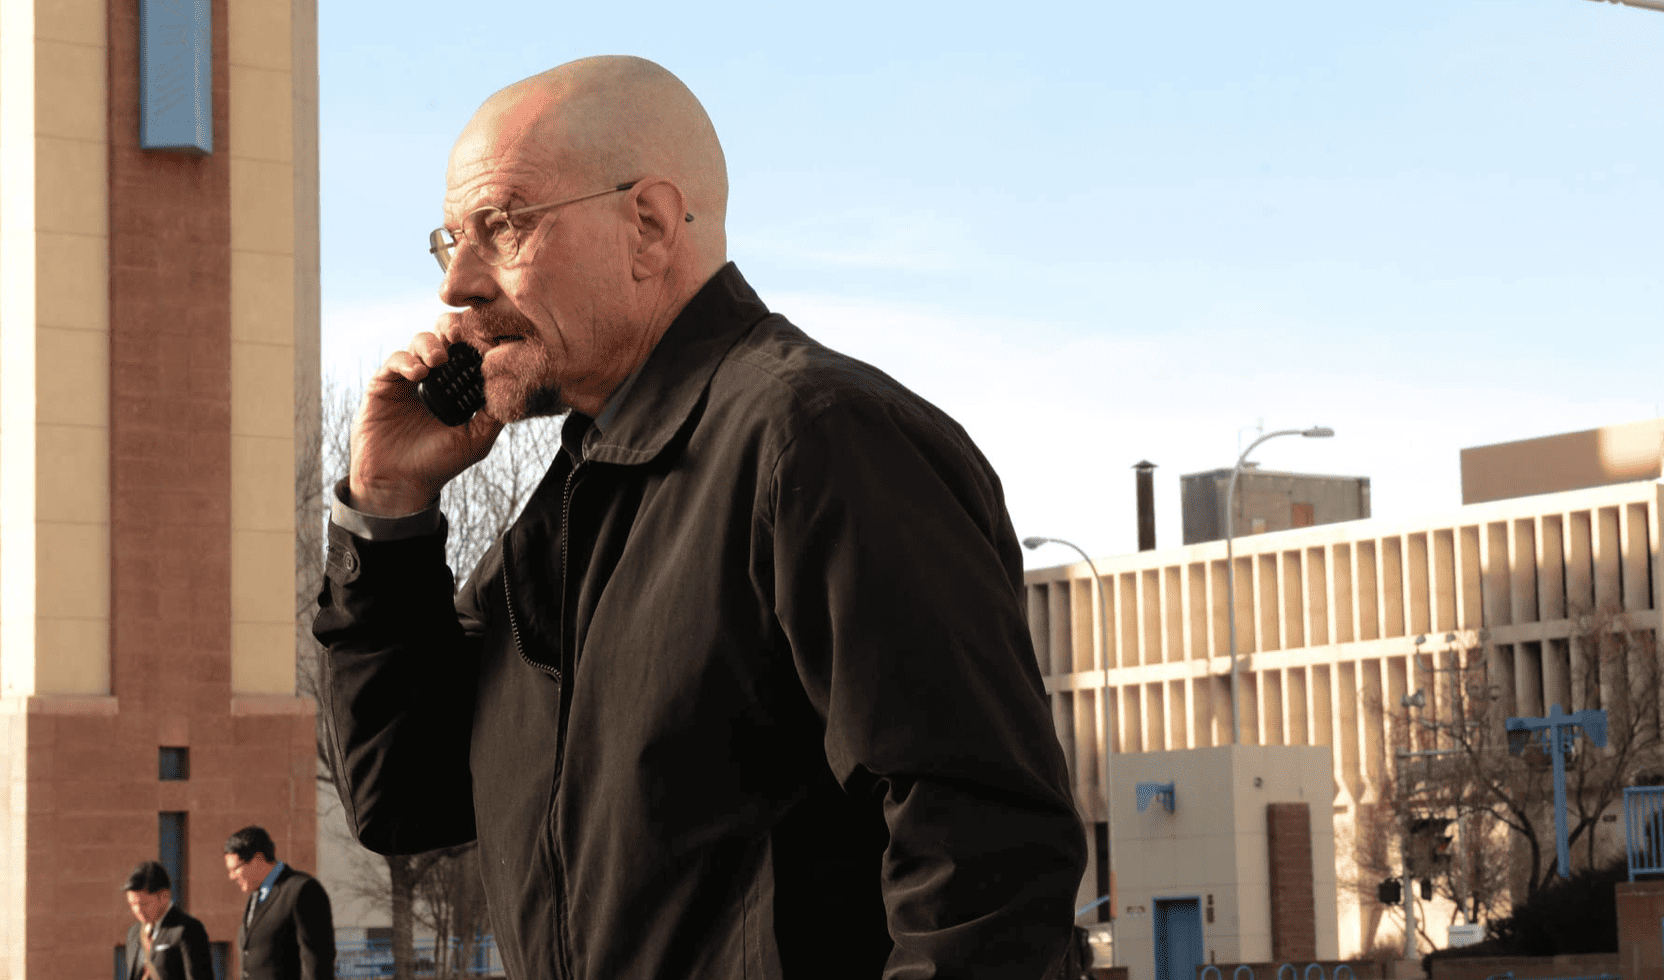 Walter White walking and talking on the phone in this image from High Bridge Entertainment.